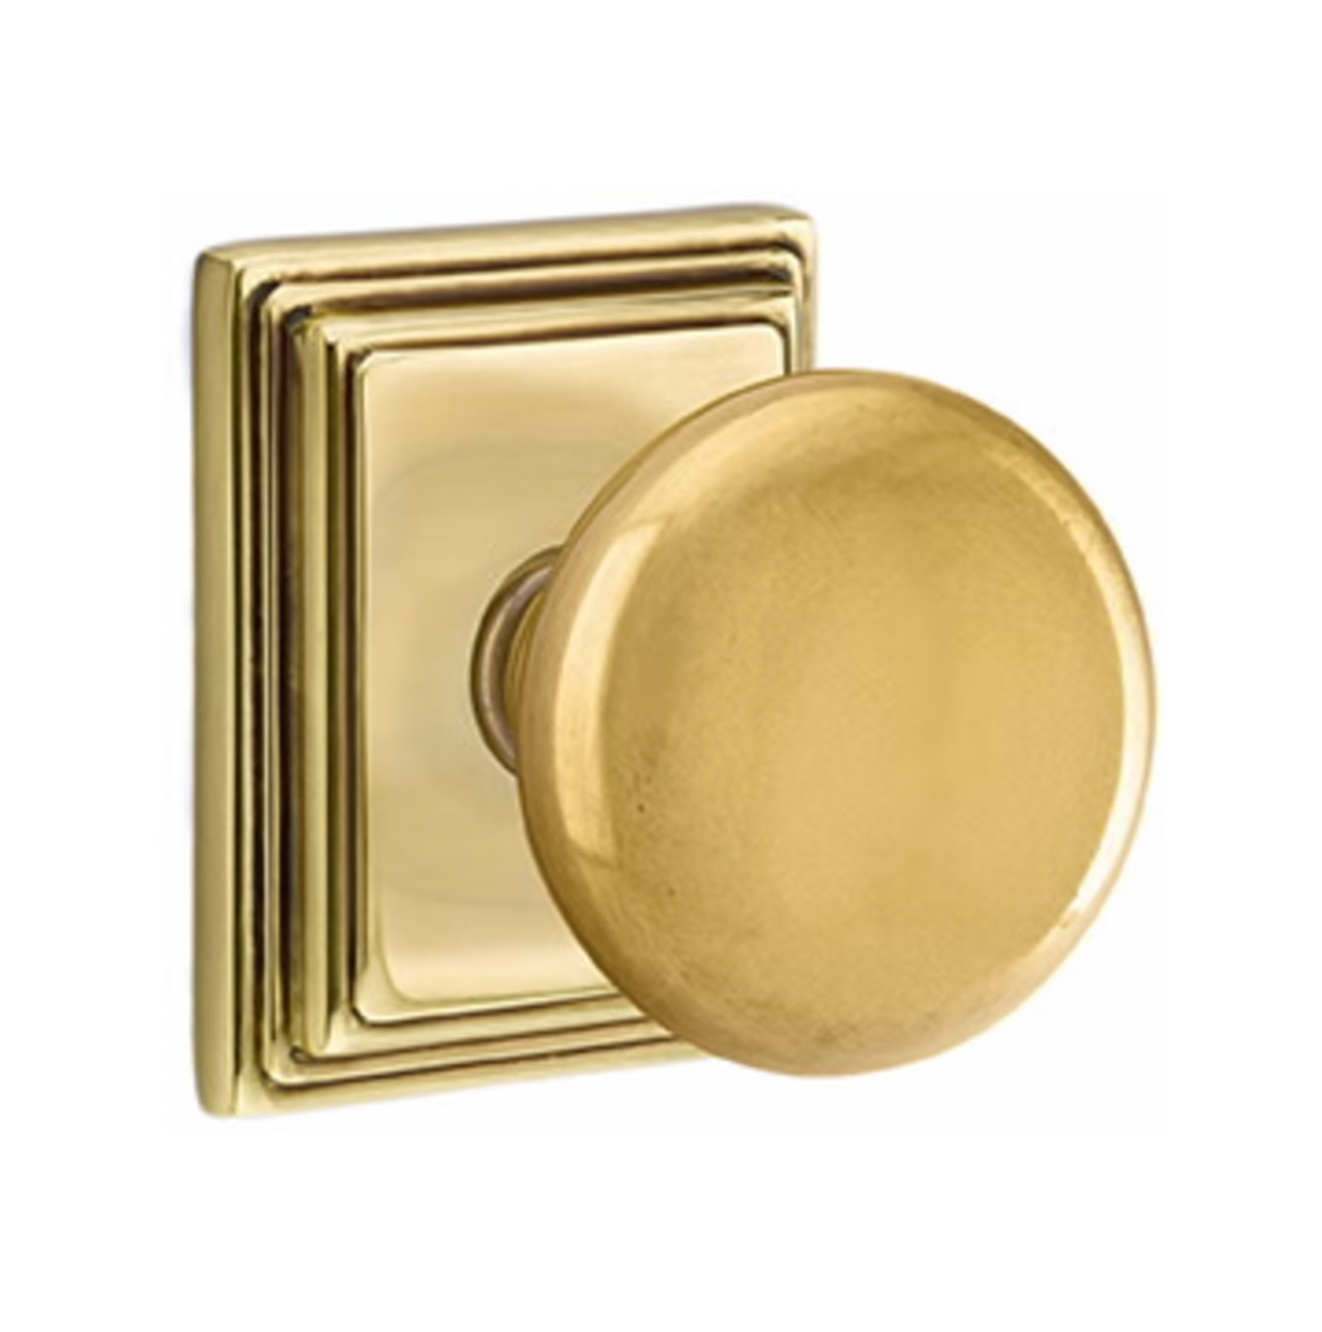 Round Door Knob "Provence" w/ Square Ridge Rosette in French Brass